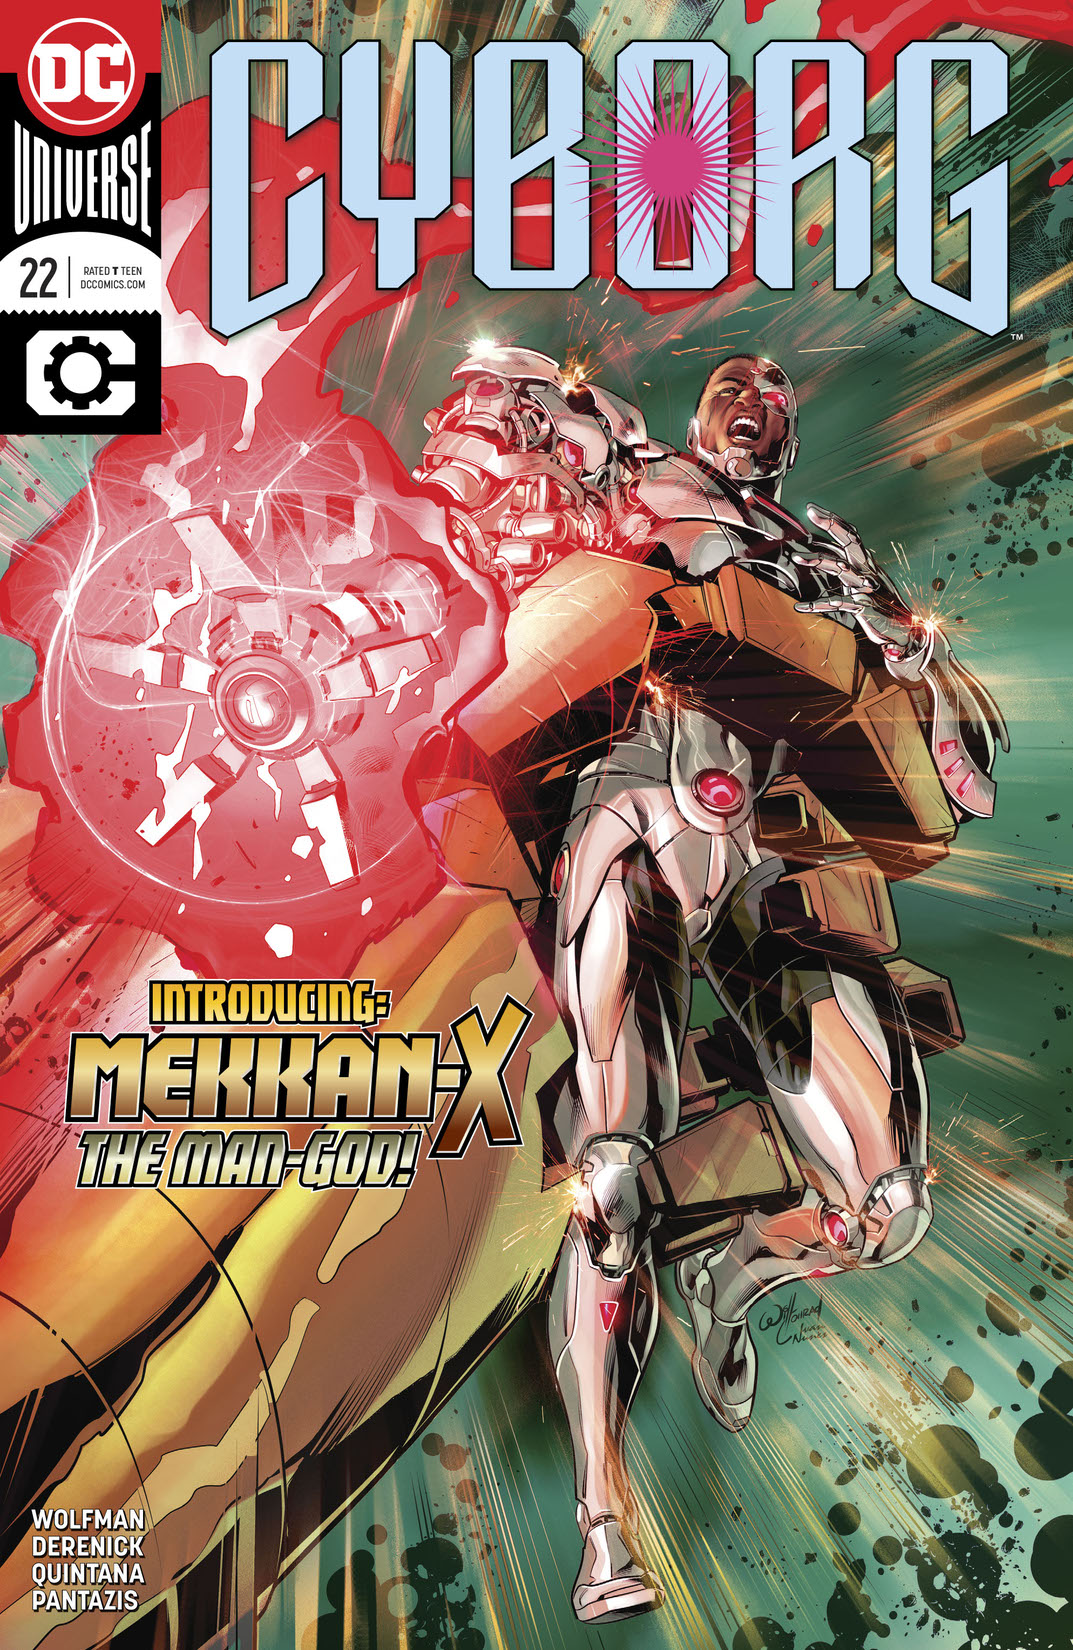 Cyborg (2016-) #22 preview images